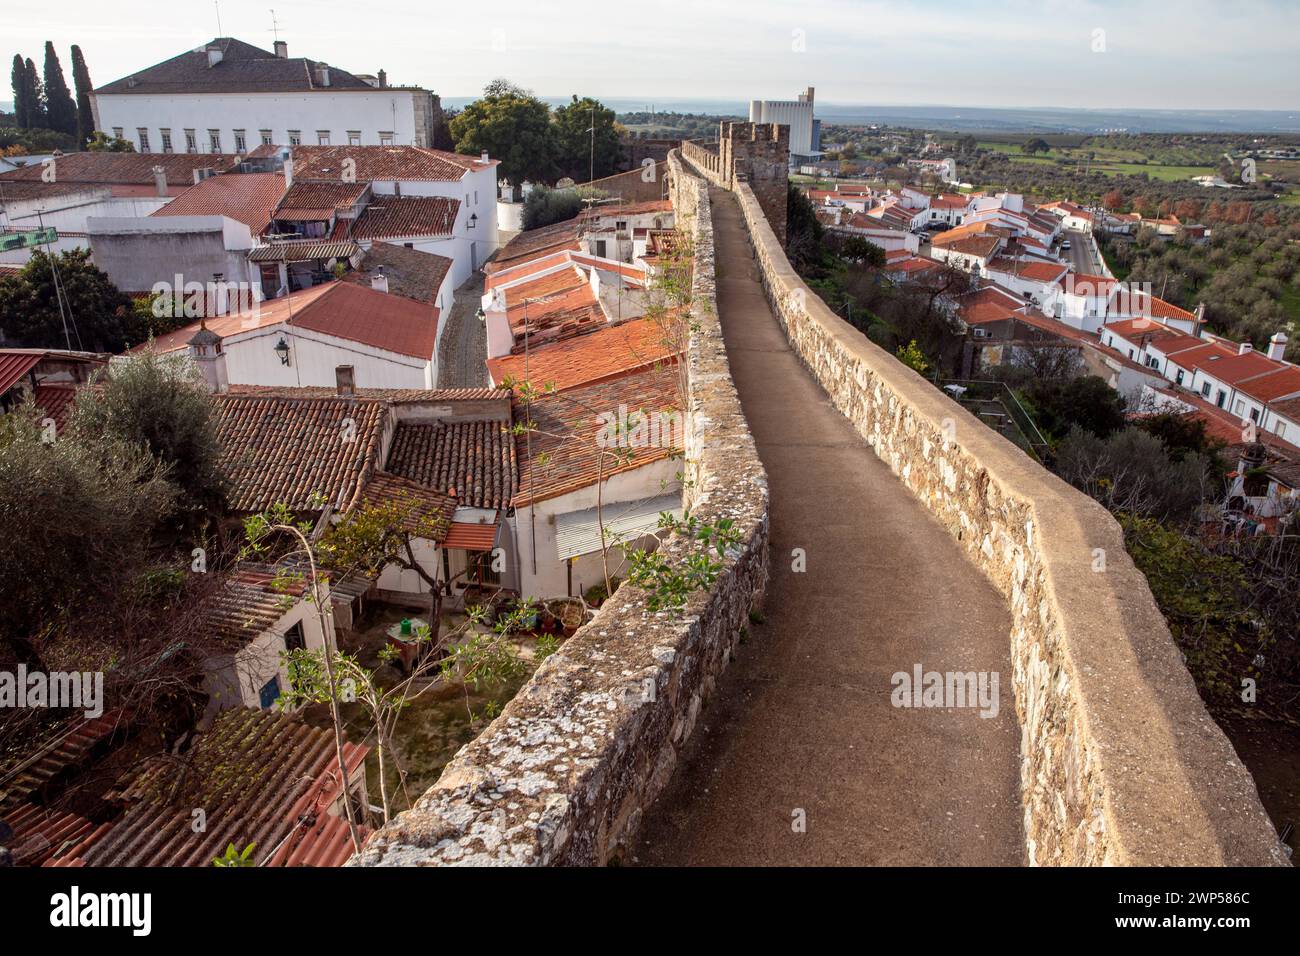 Portugal Cultural travel, city trips and interesting sights View of the rooftops and the castle wall of the city of Serpa in the Alentejo region Stock Photo